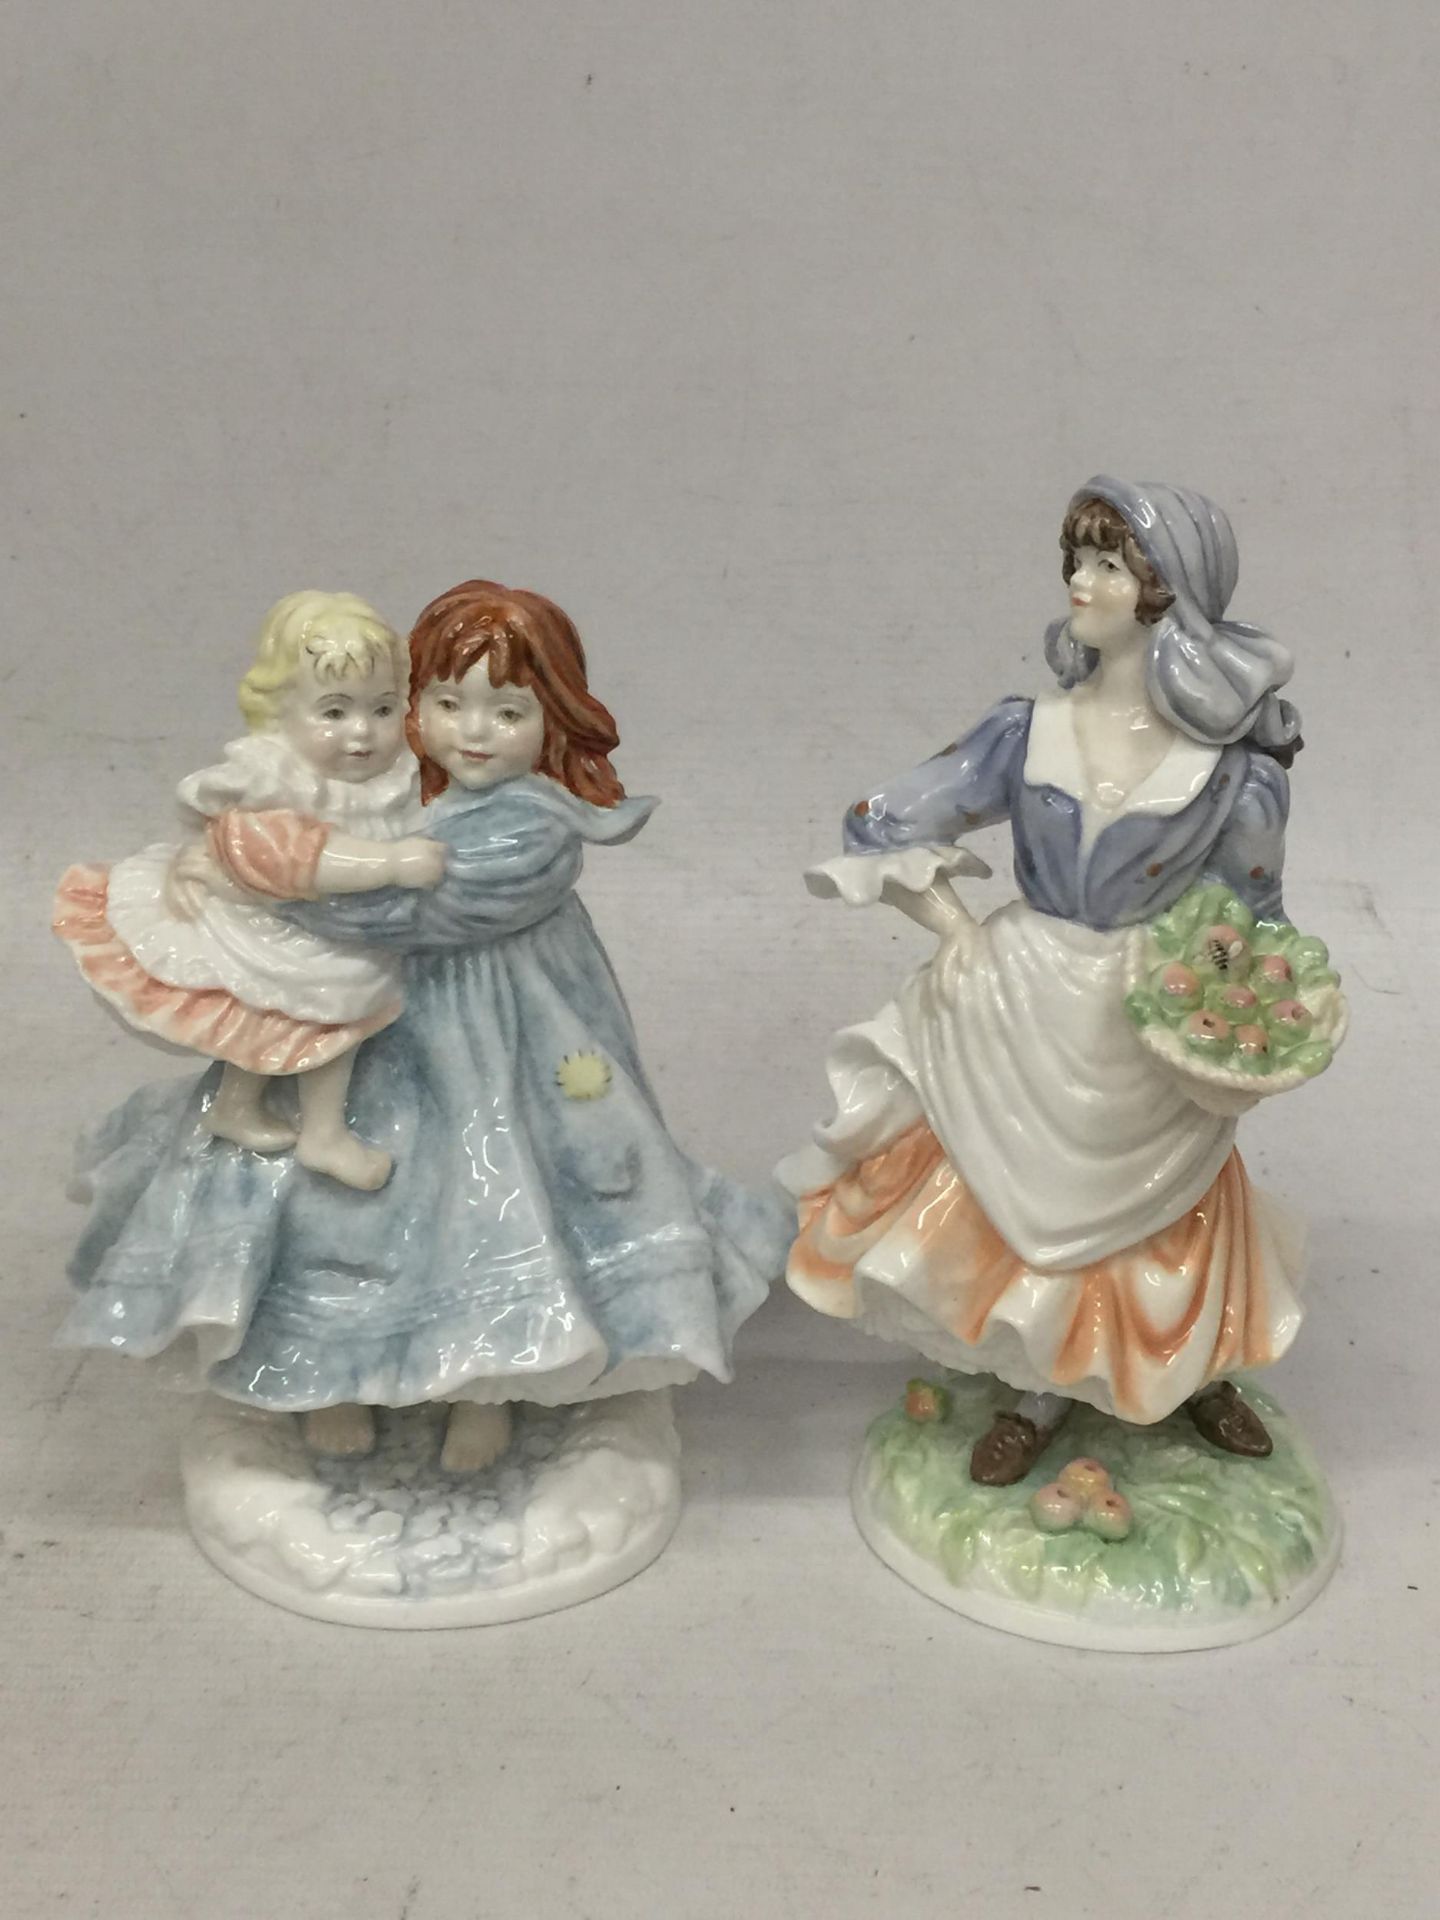 TWO LIMITED EDITION ROYAL WORCESTER FIGURES - 'LOVE' & 'ROSIE PICKING APPLES'